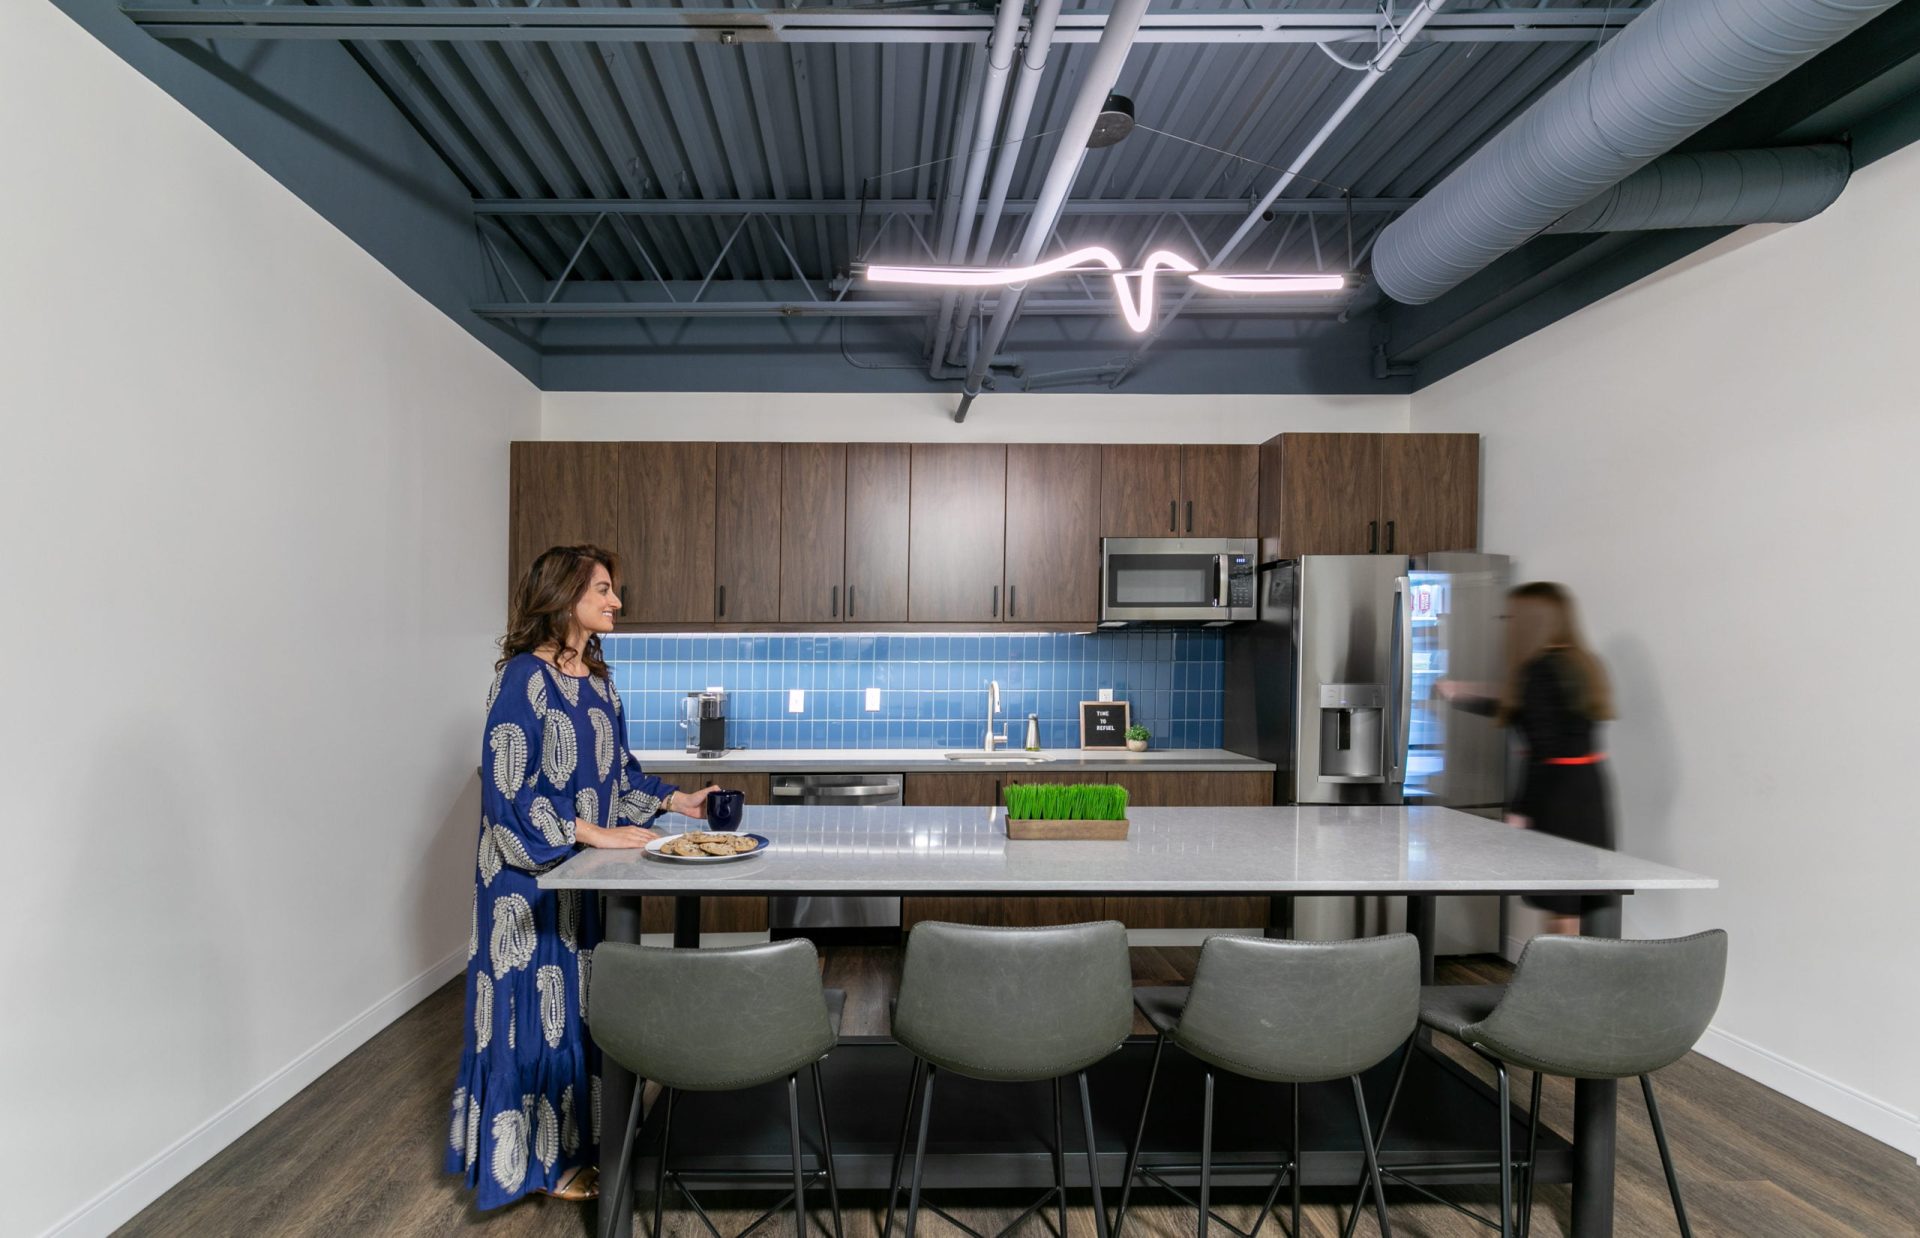 Office Kitchen that encourages employee interaction and boosting morale